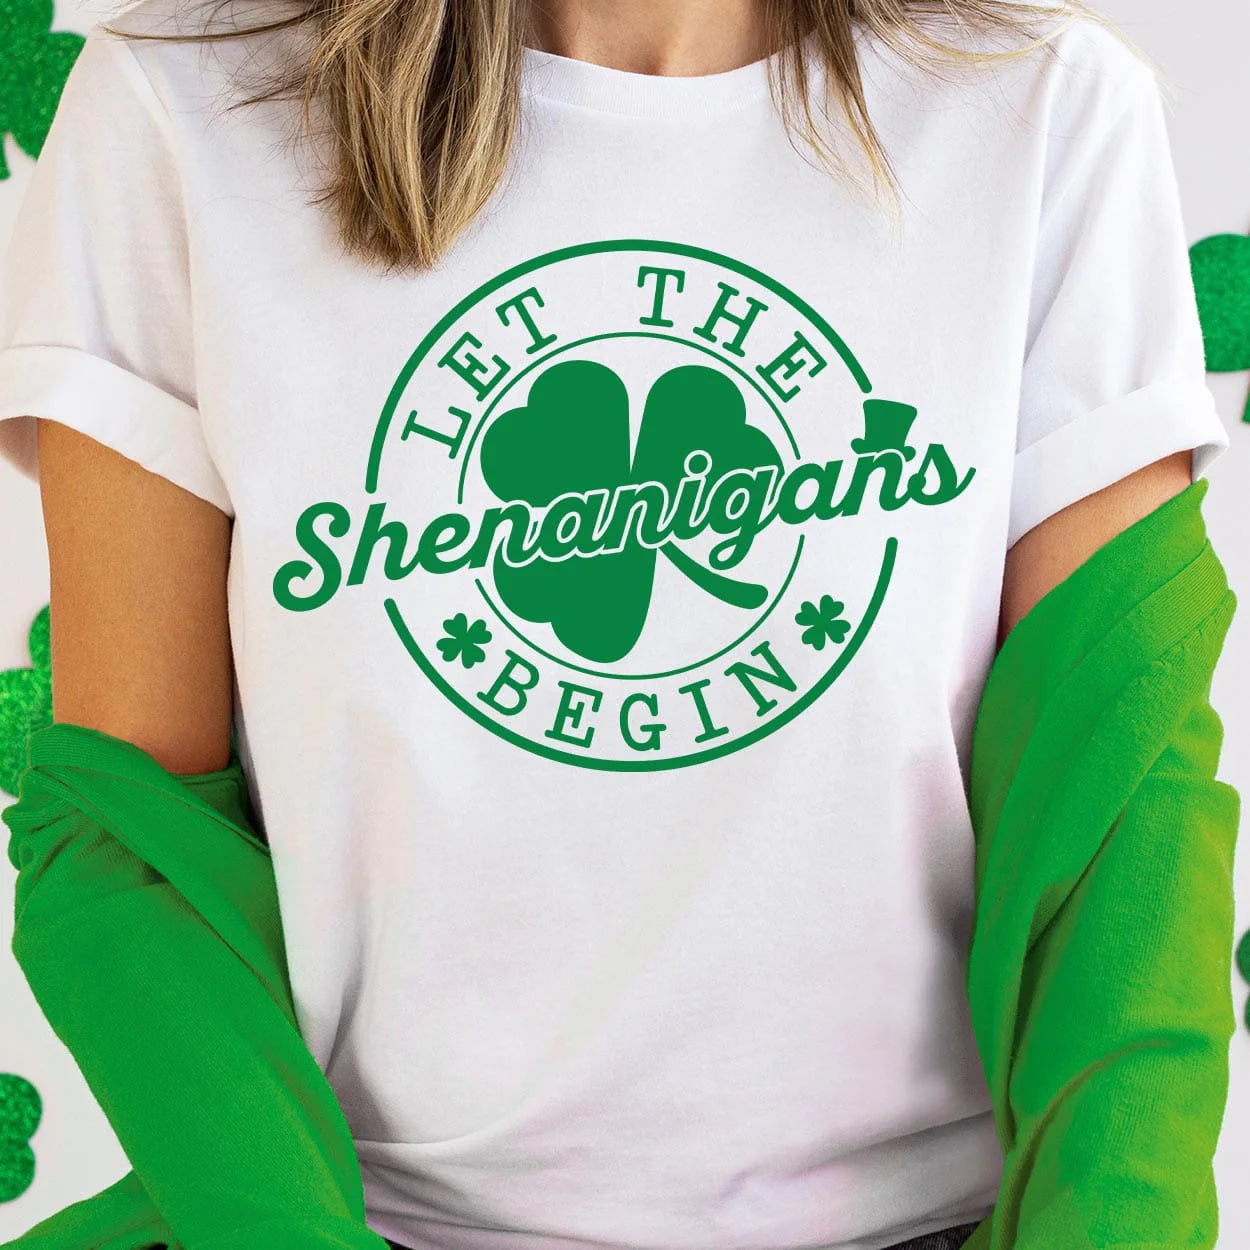 A white short sleeve tee featuring a large circular graphic saying "Let the shenanigans begin" in dark green with a clover behind "shenanigans" and little clovers before and after "begin". Item is pictured on a white and green background